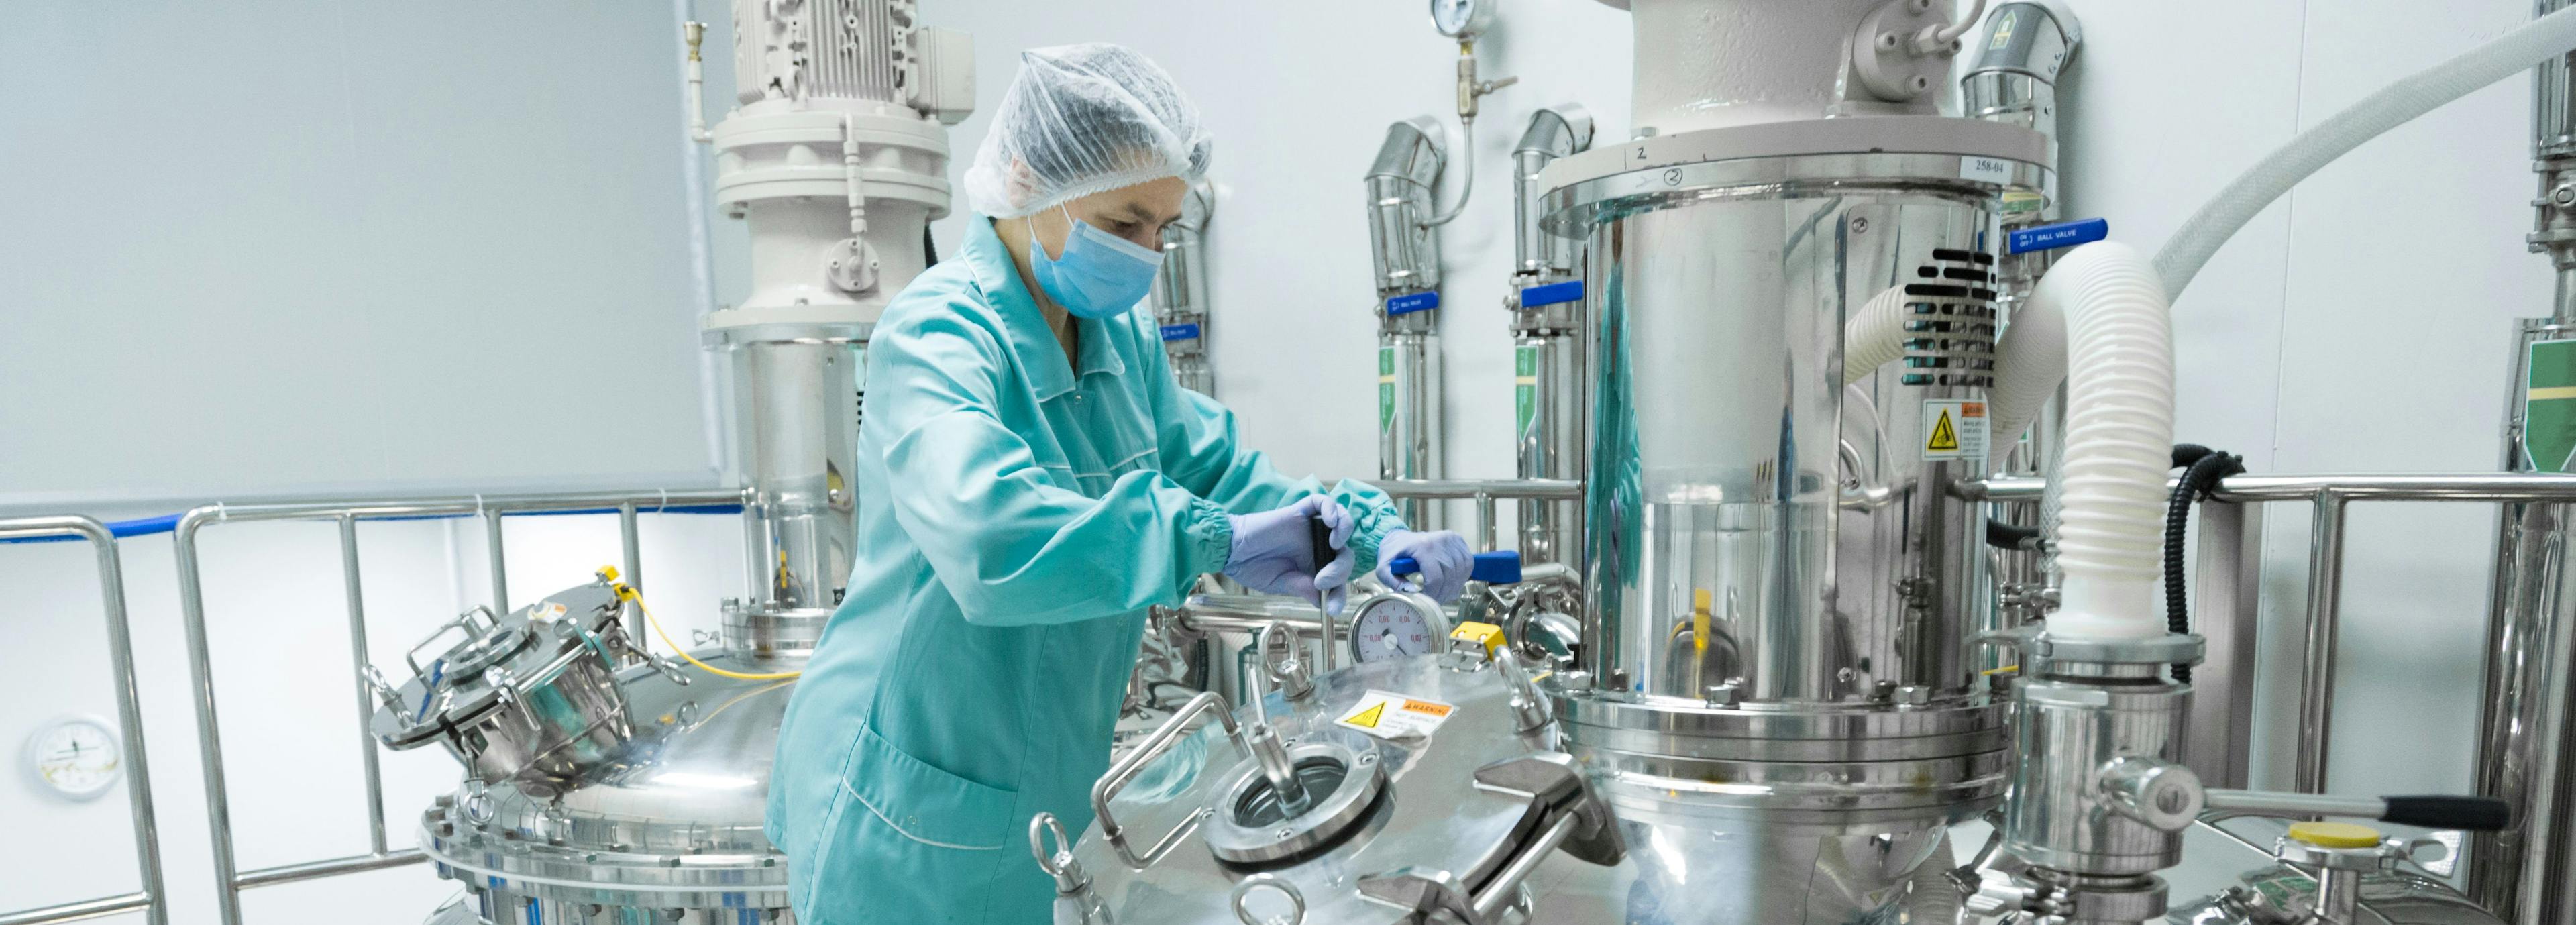 Pharmaceutical factory woman worker in protective clothing operating production line in sterile environment | Image Credit: © Ivan Traimak - stock.adobe.com